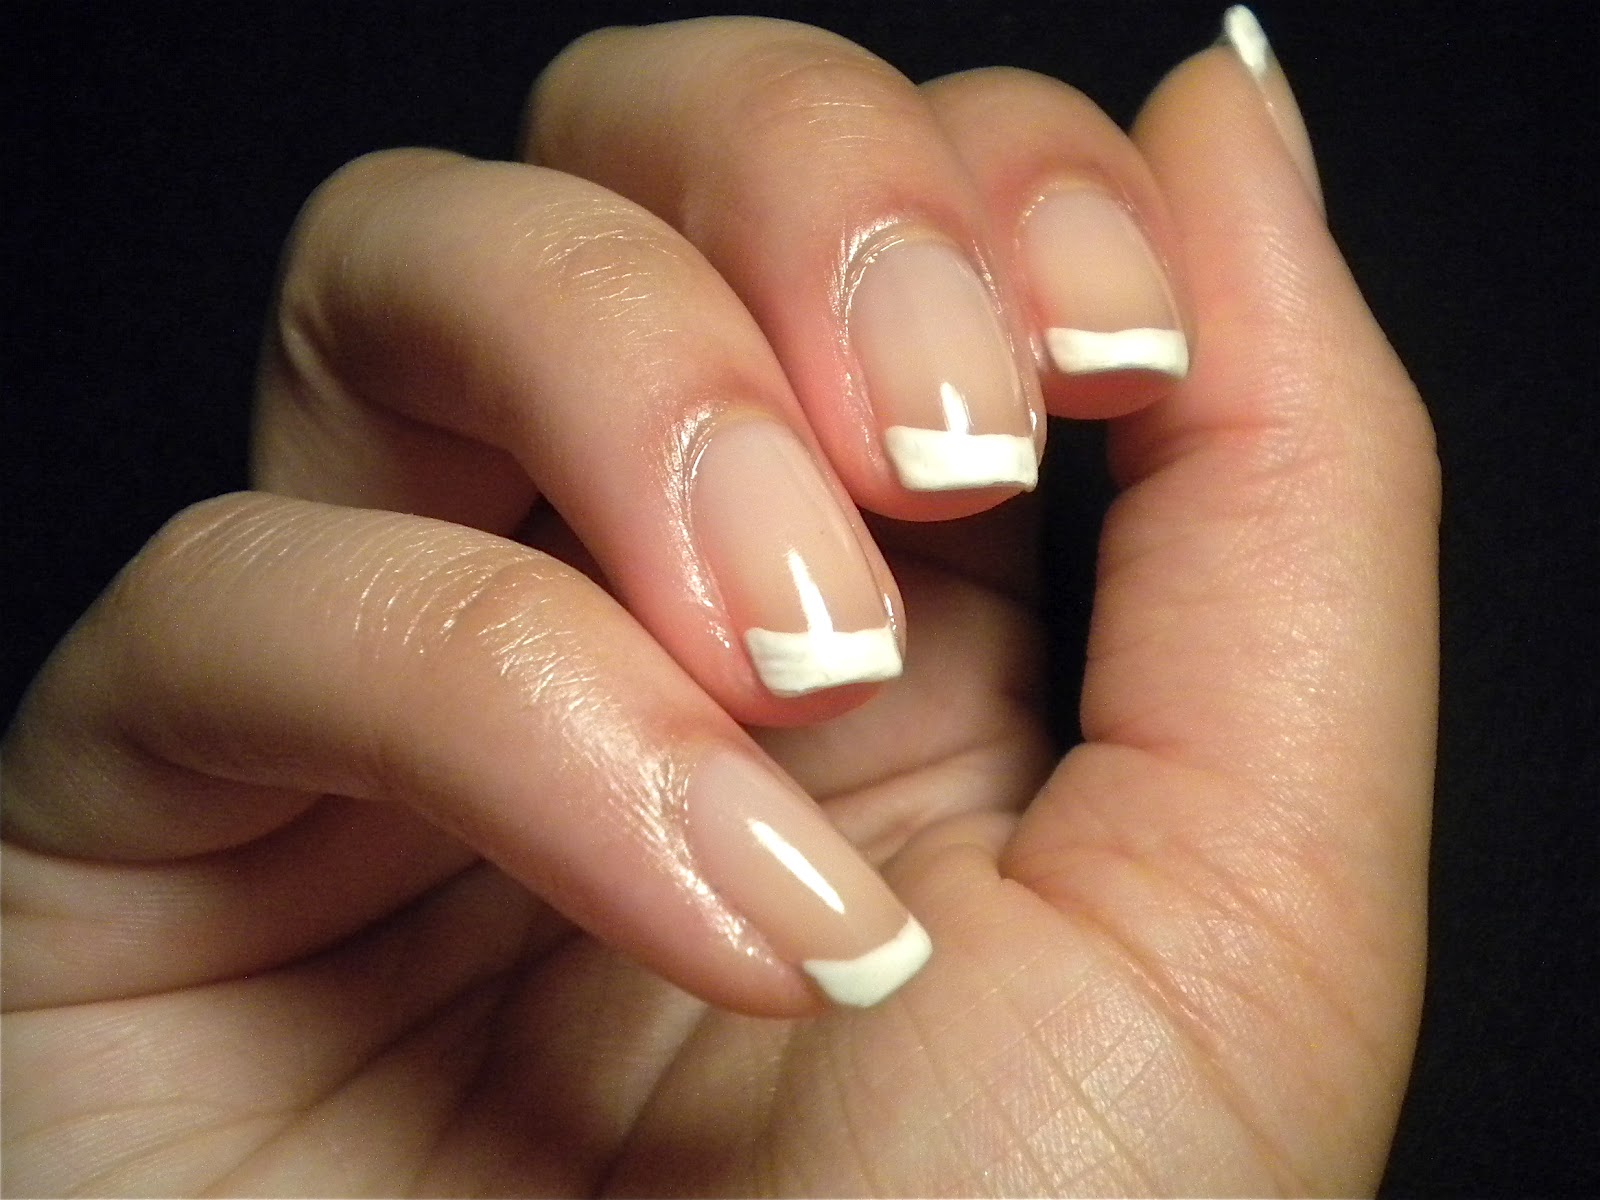 2. "Christmas-Themed French Manicure Designs" - wide 4